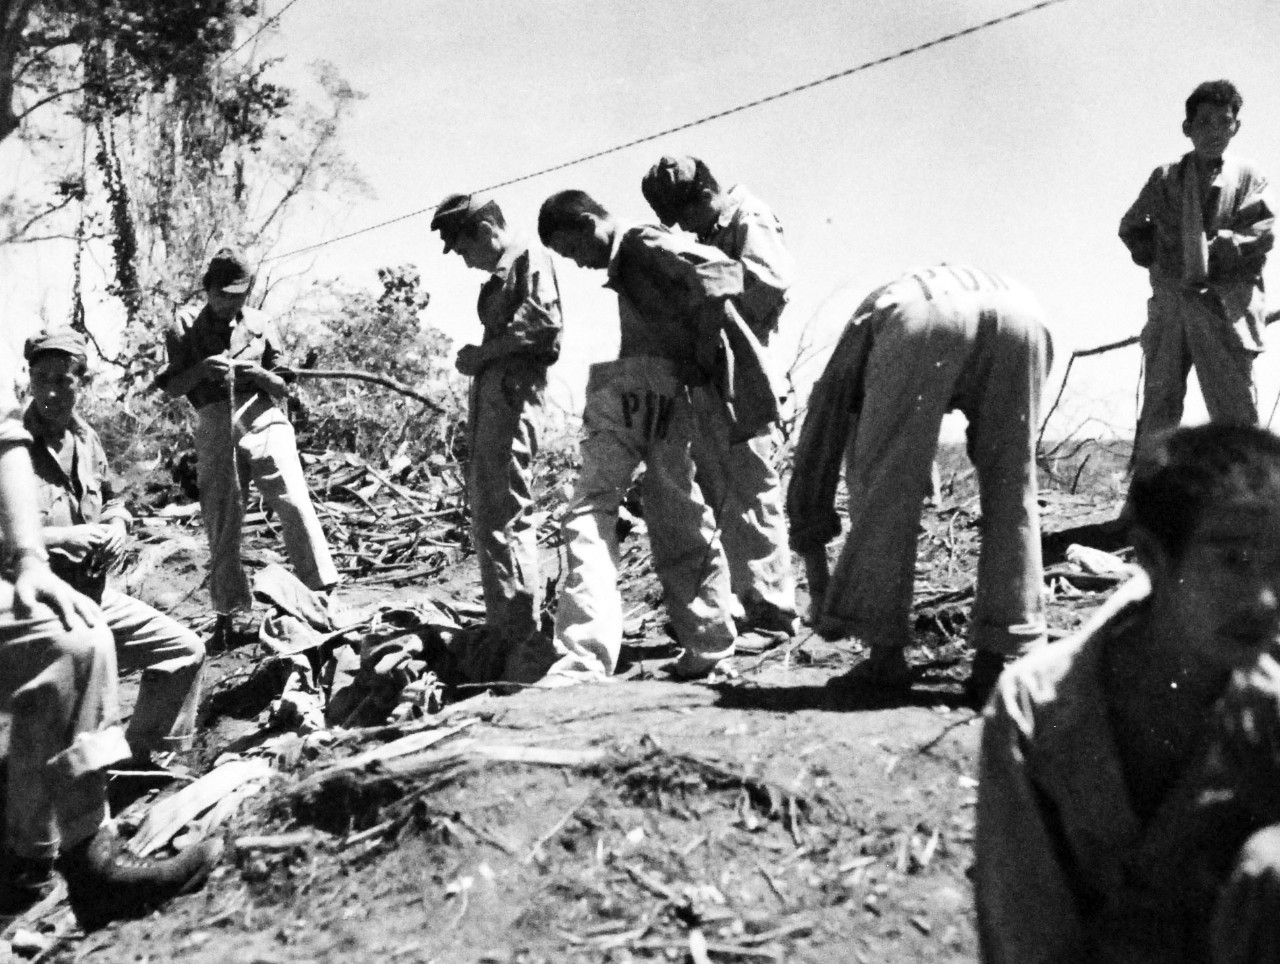 127-GW-971-89059:  Battle of Cape Gloucester, New Britain, December 1943-January 1944.  Japanese prisoners putting on clean closes.  Photographed by Howard, March 1944.  Official U.S. Marine Corps Photograph, now in the collections of the National Archives.   (2014/7/9).